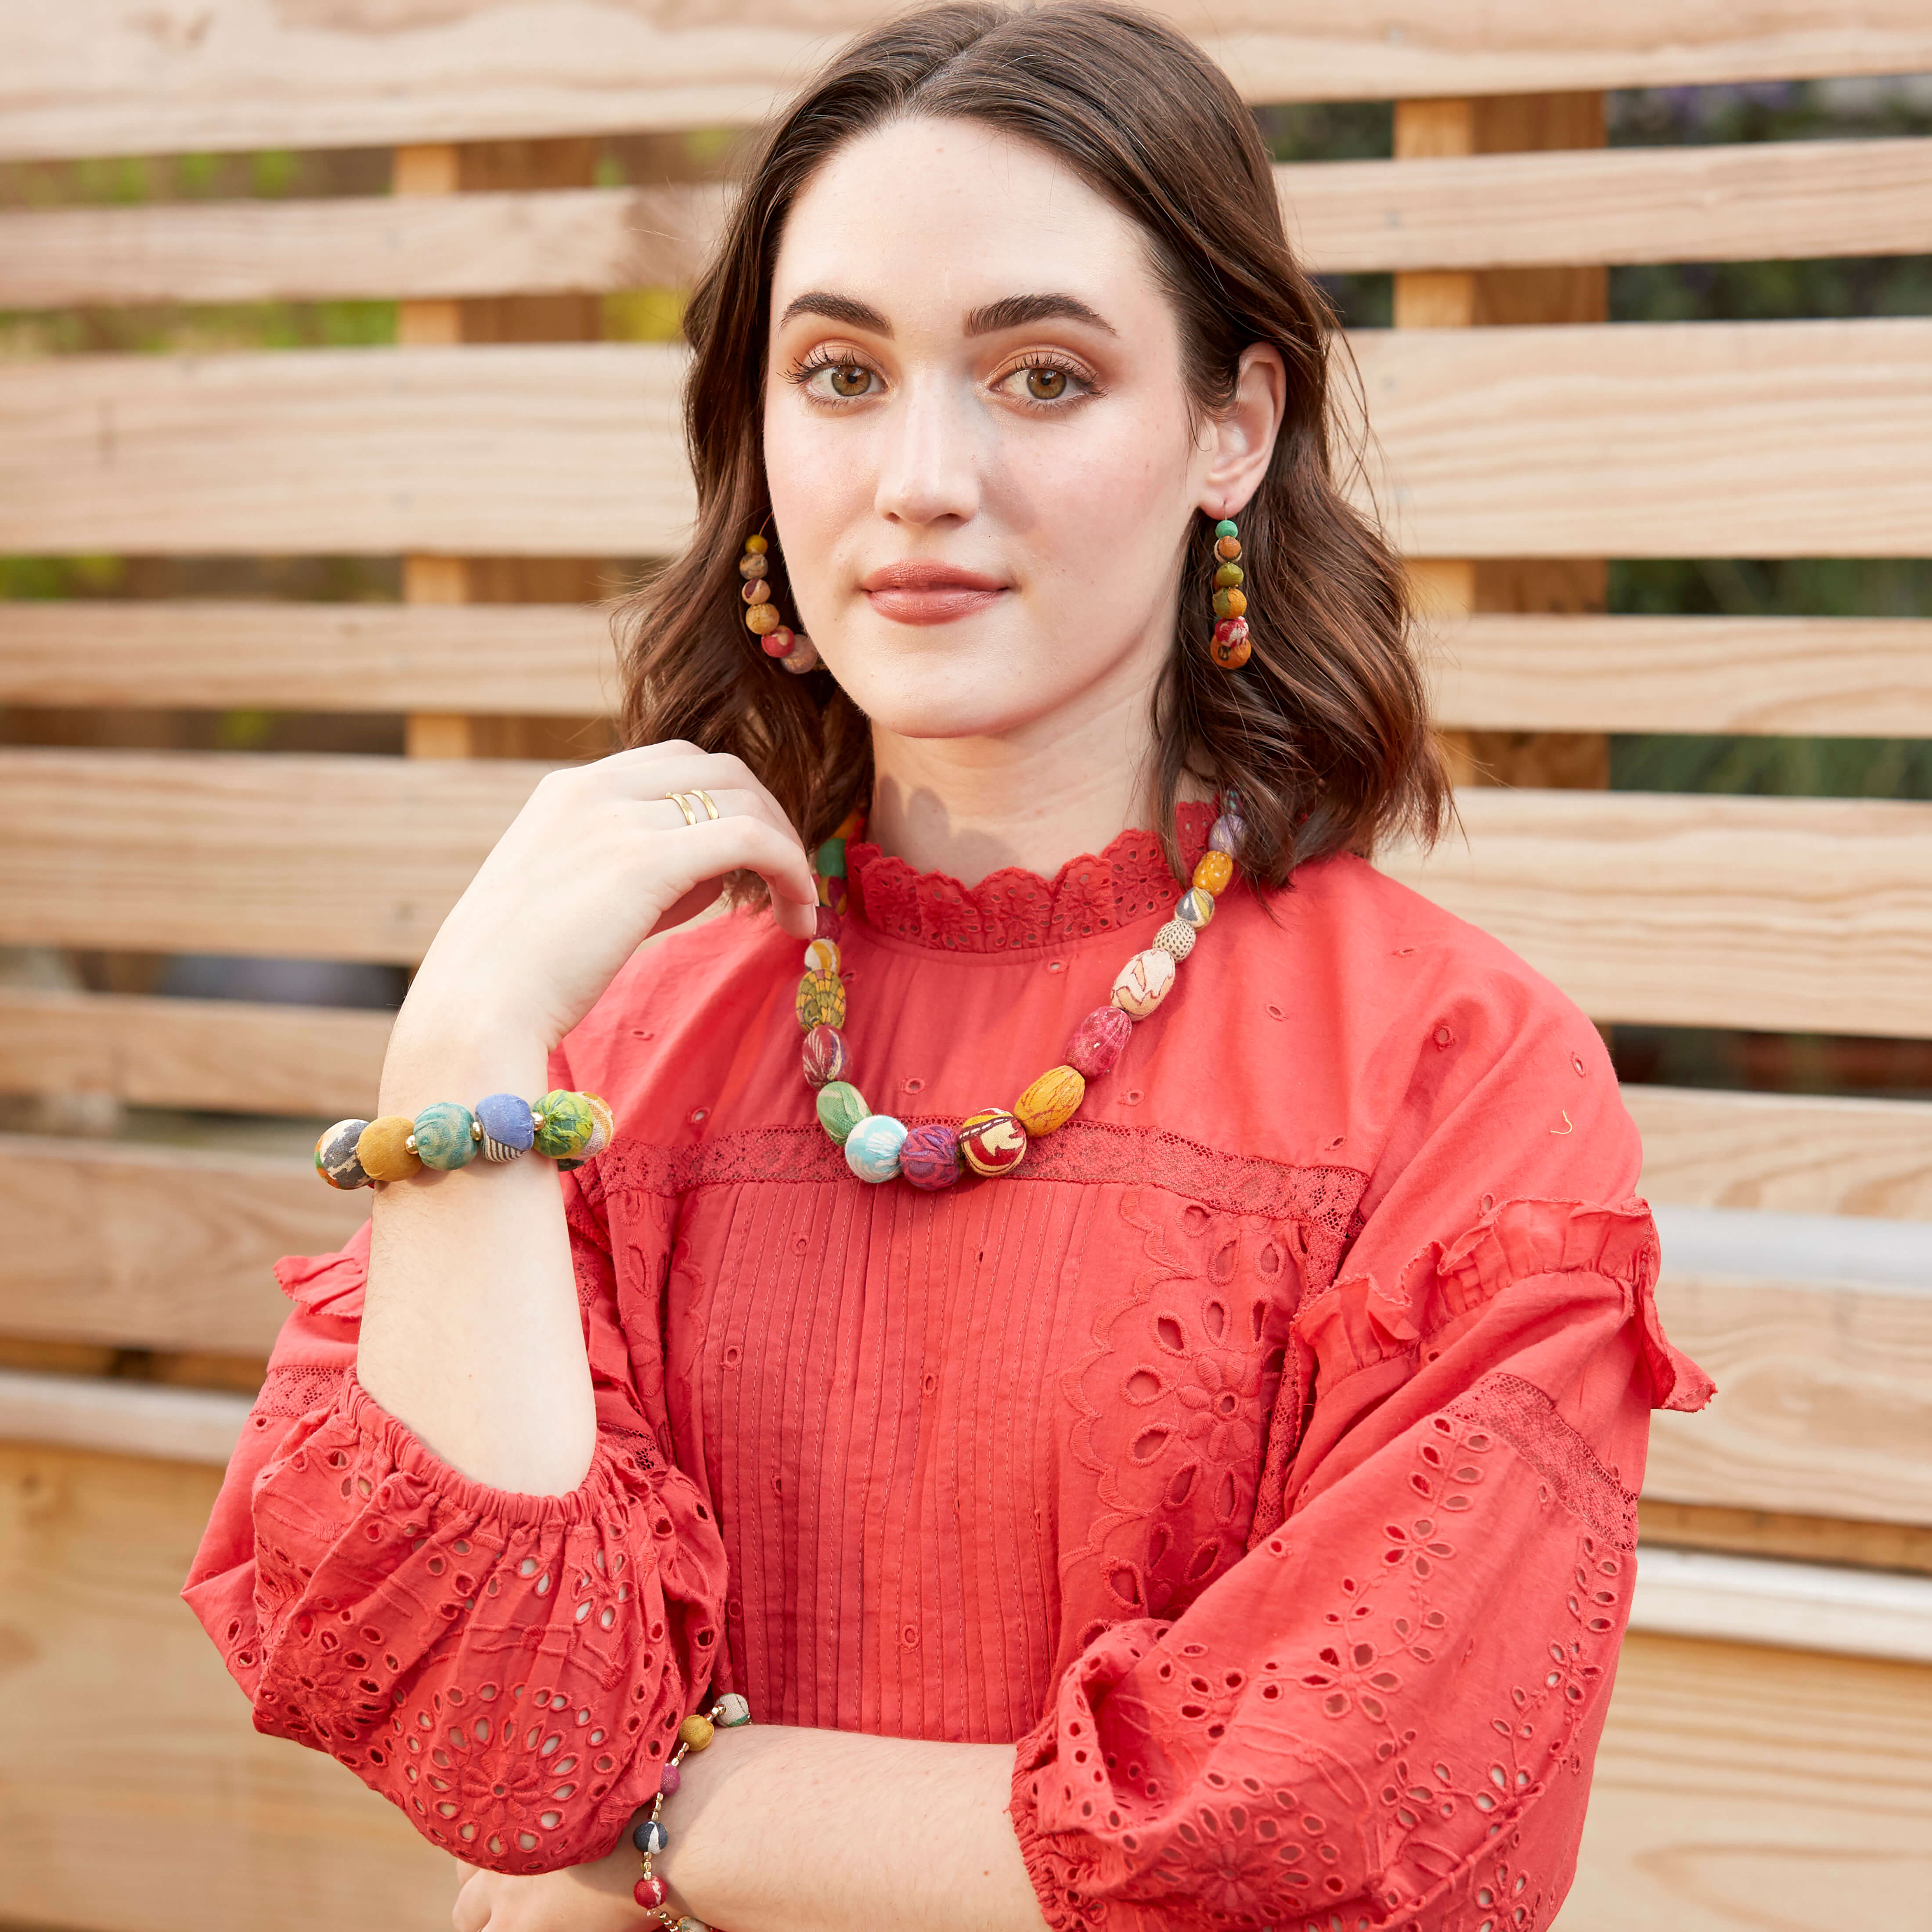 A model wears the Kantha Halcyon Necklace along with other fair trade jewelry.